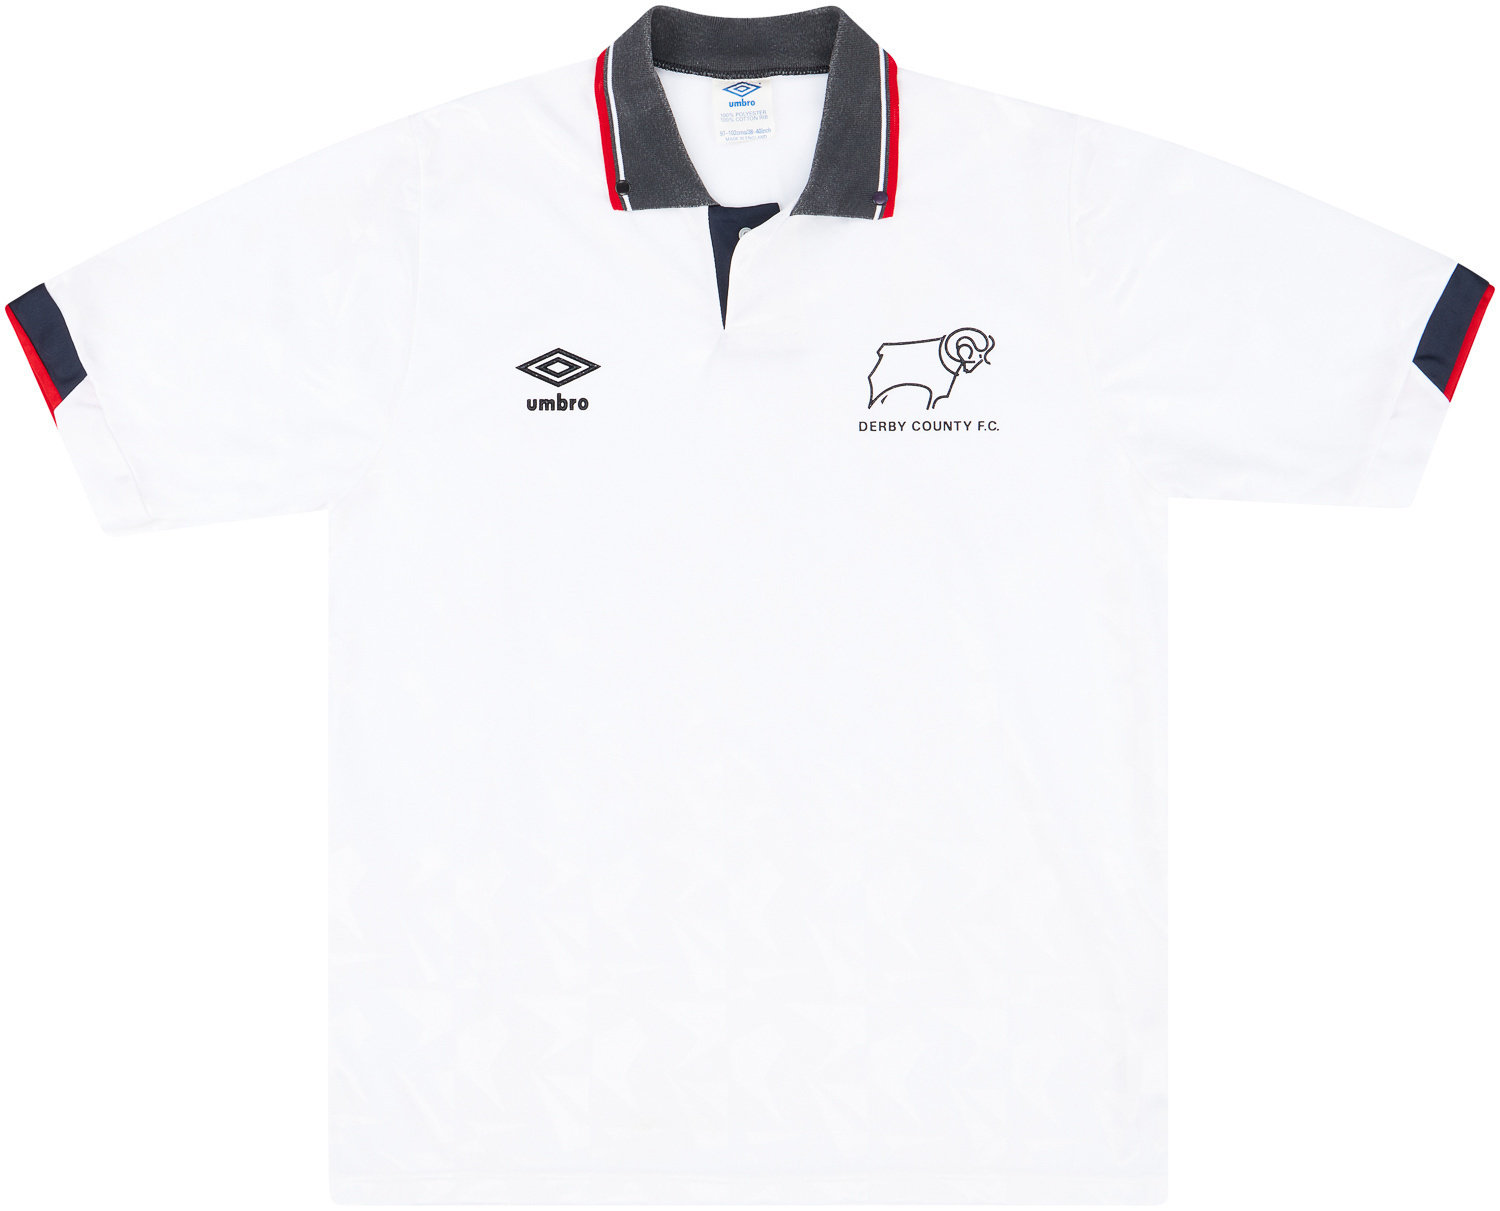 1989-91 Derby County Home Shirt - 8/10 - ()